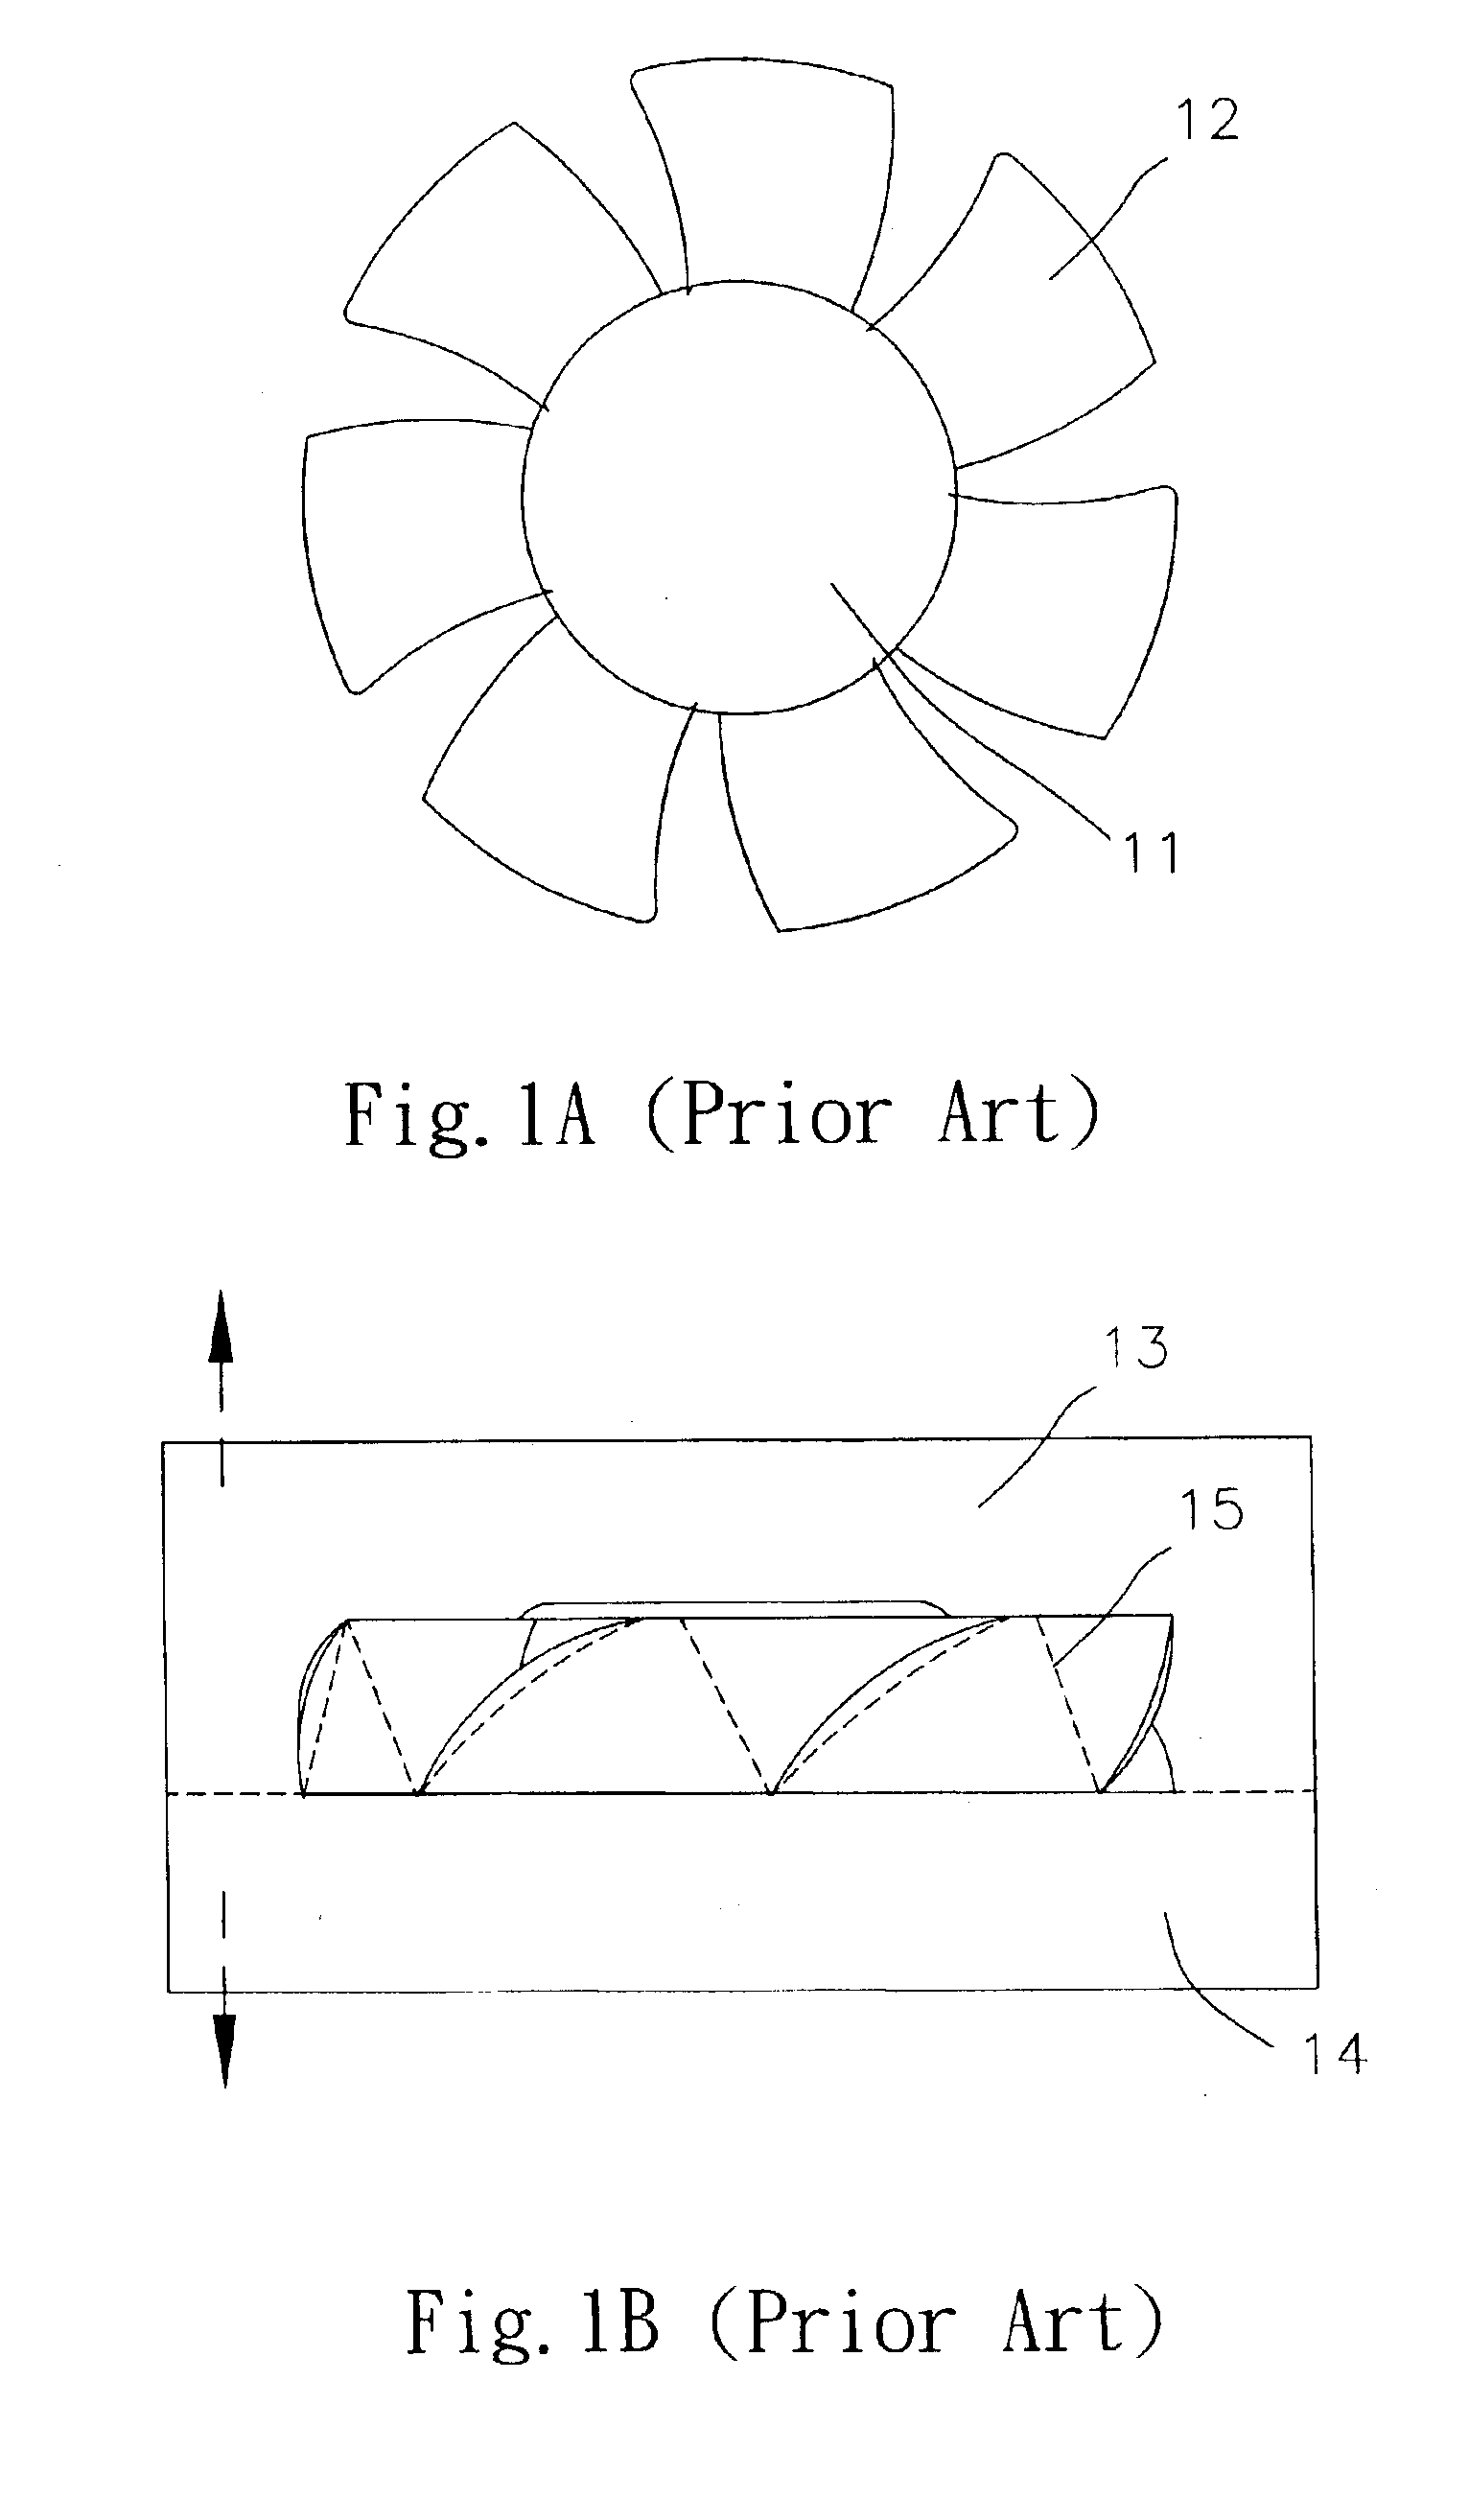 Heat-dissipating device and its manufacturing process